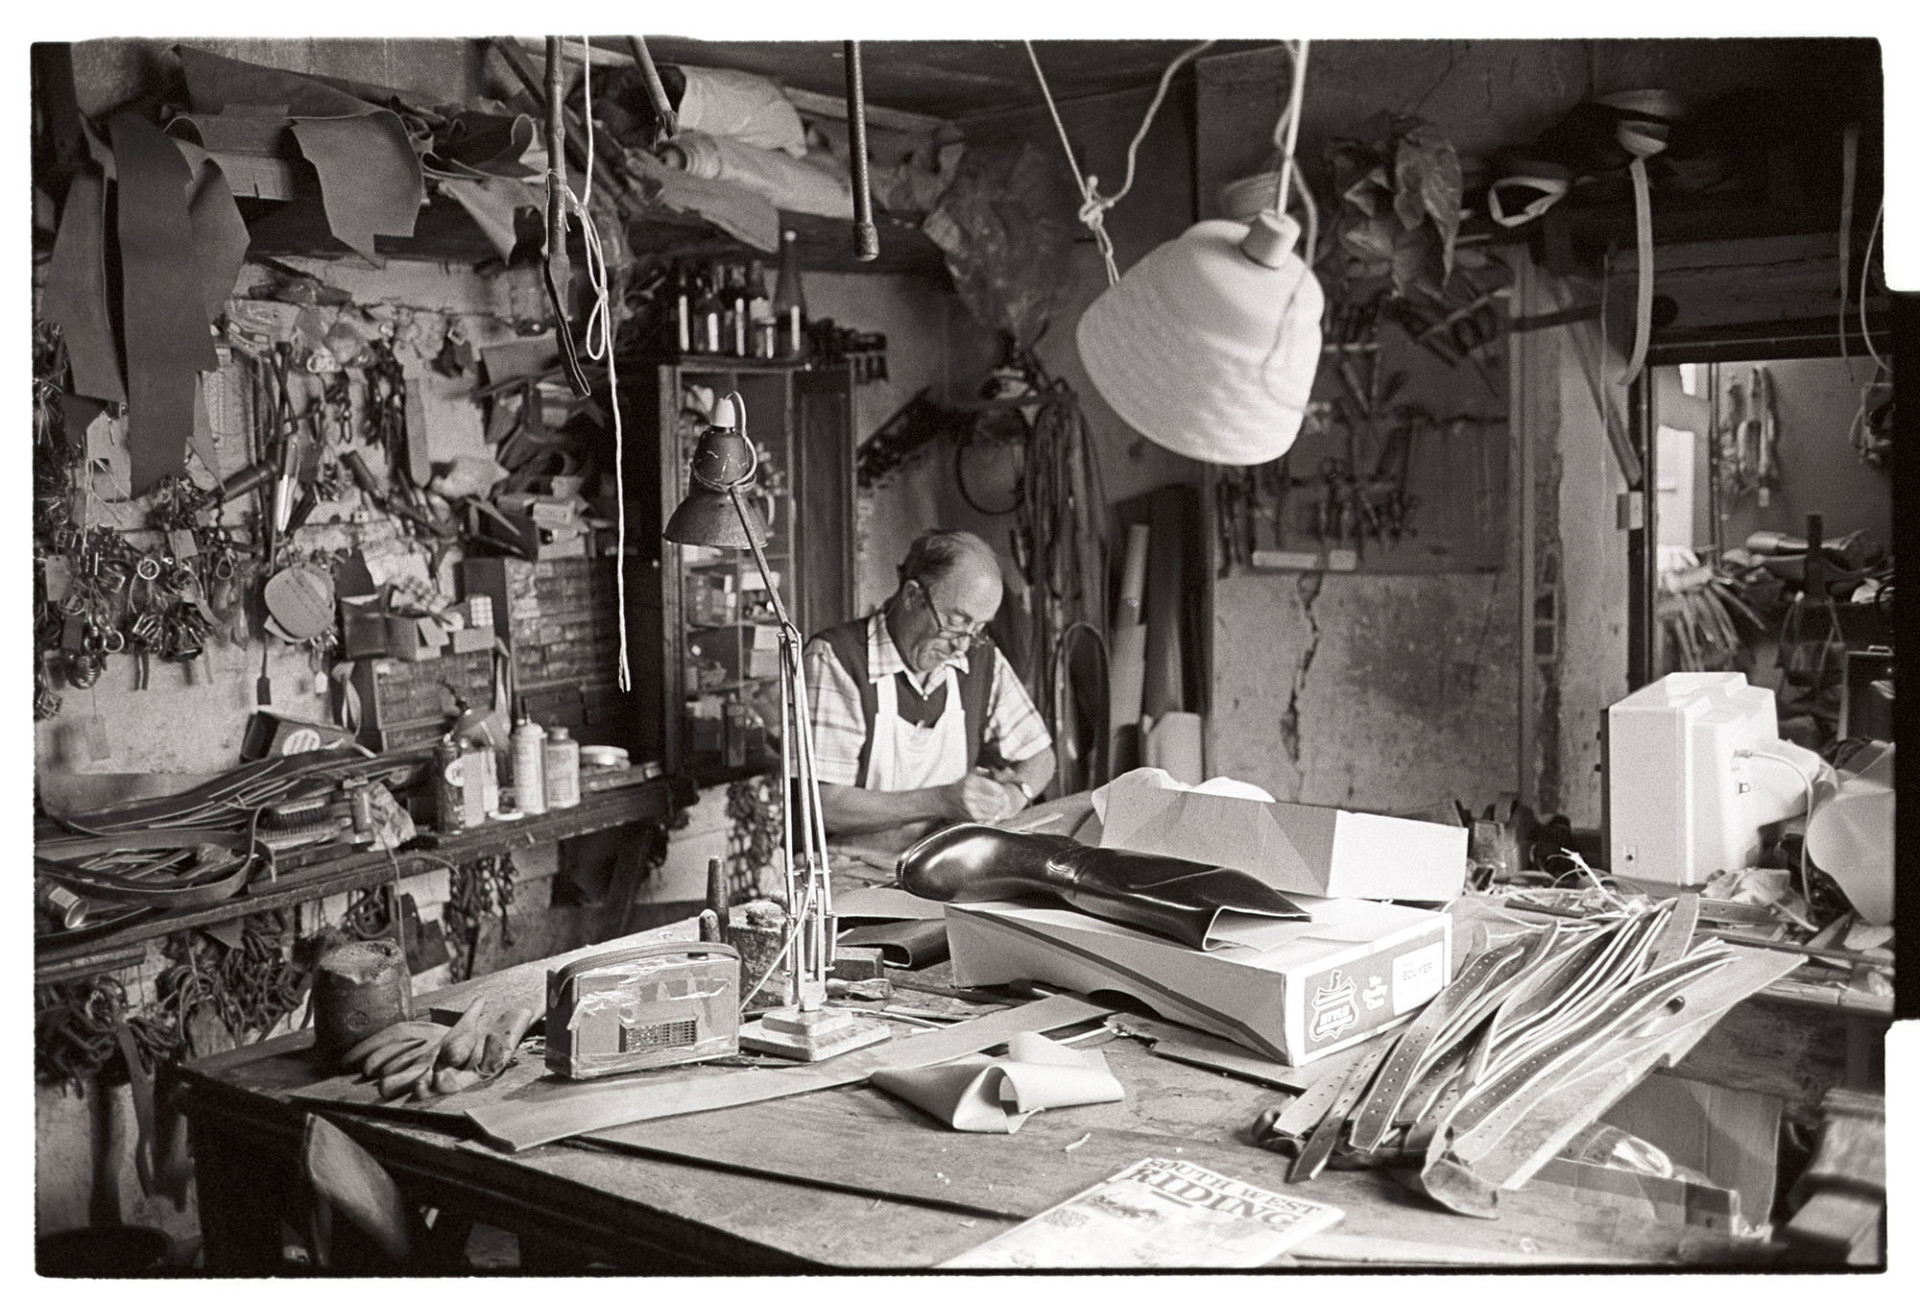 Saddler in his workshop, tools, materials, goods on display. <br />
[Derek Johns, a saddler, sat at a bench in his workshop at Buttgarten Street, Bideford. A lamp and radio are also on the workbench. Various goods and tools are on display, including a boot, belts or straps and gloves.]